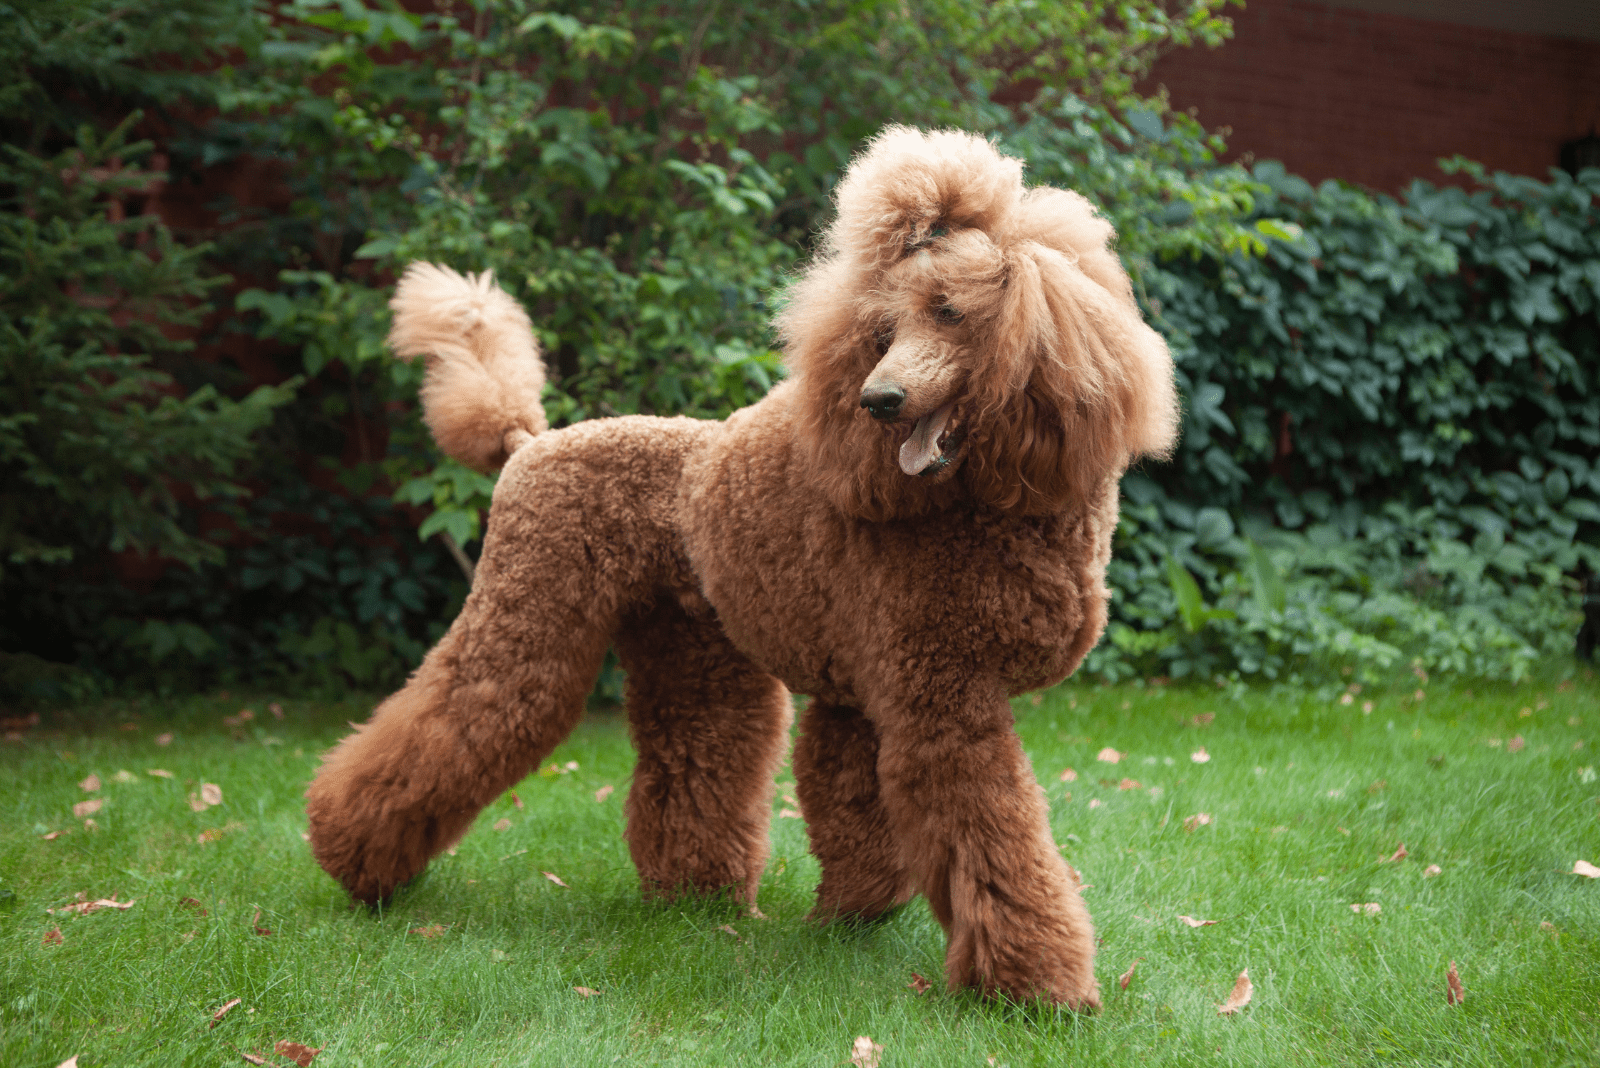 Large Poodle walks in the field